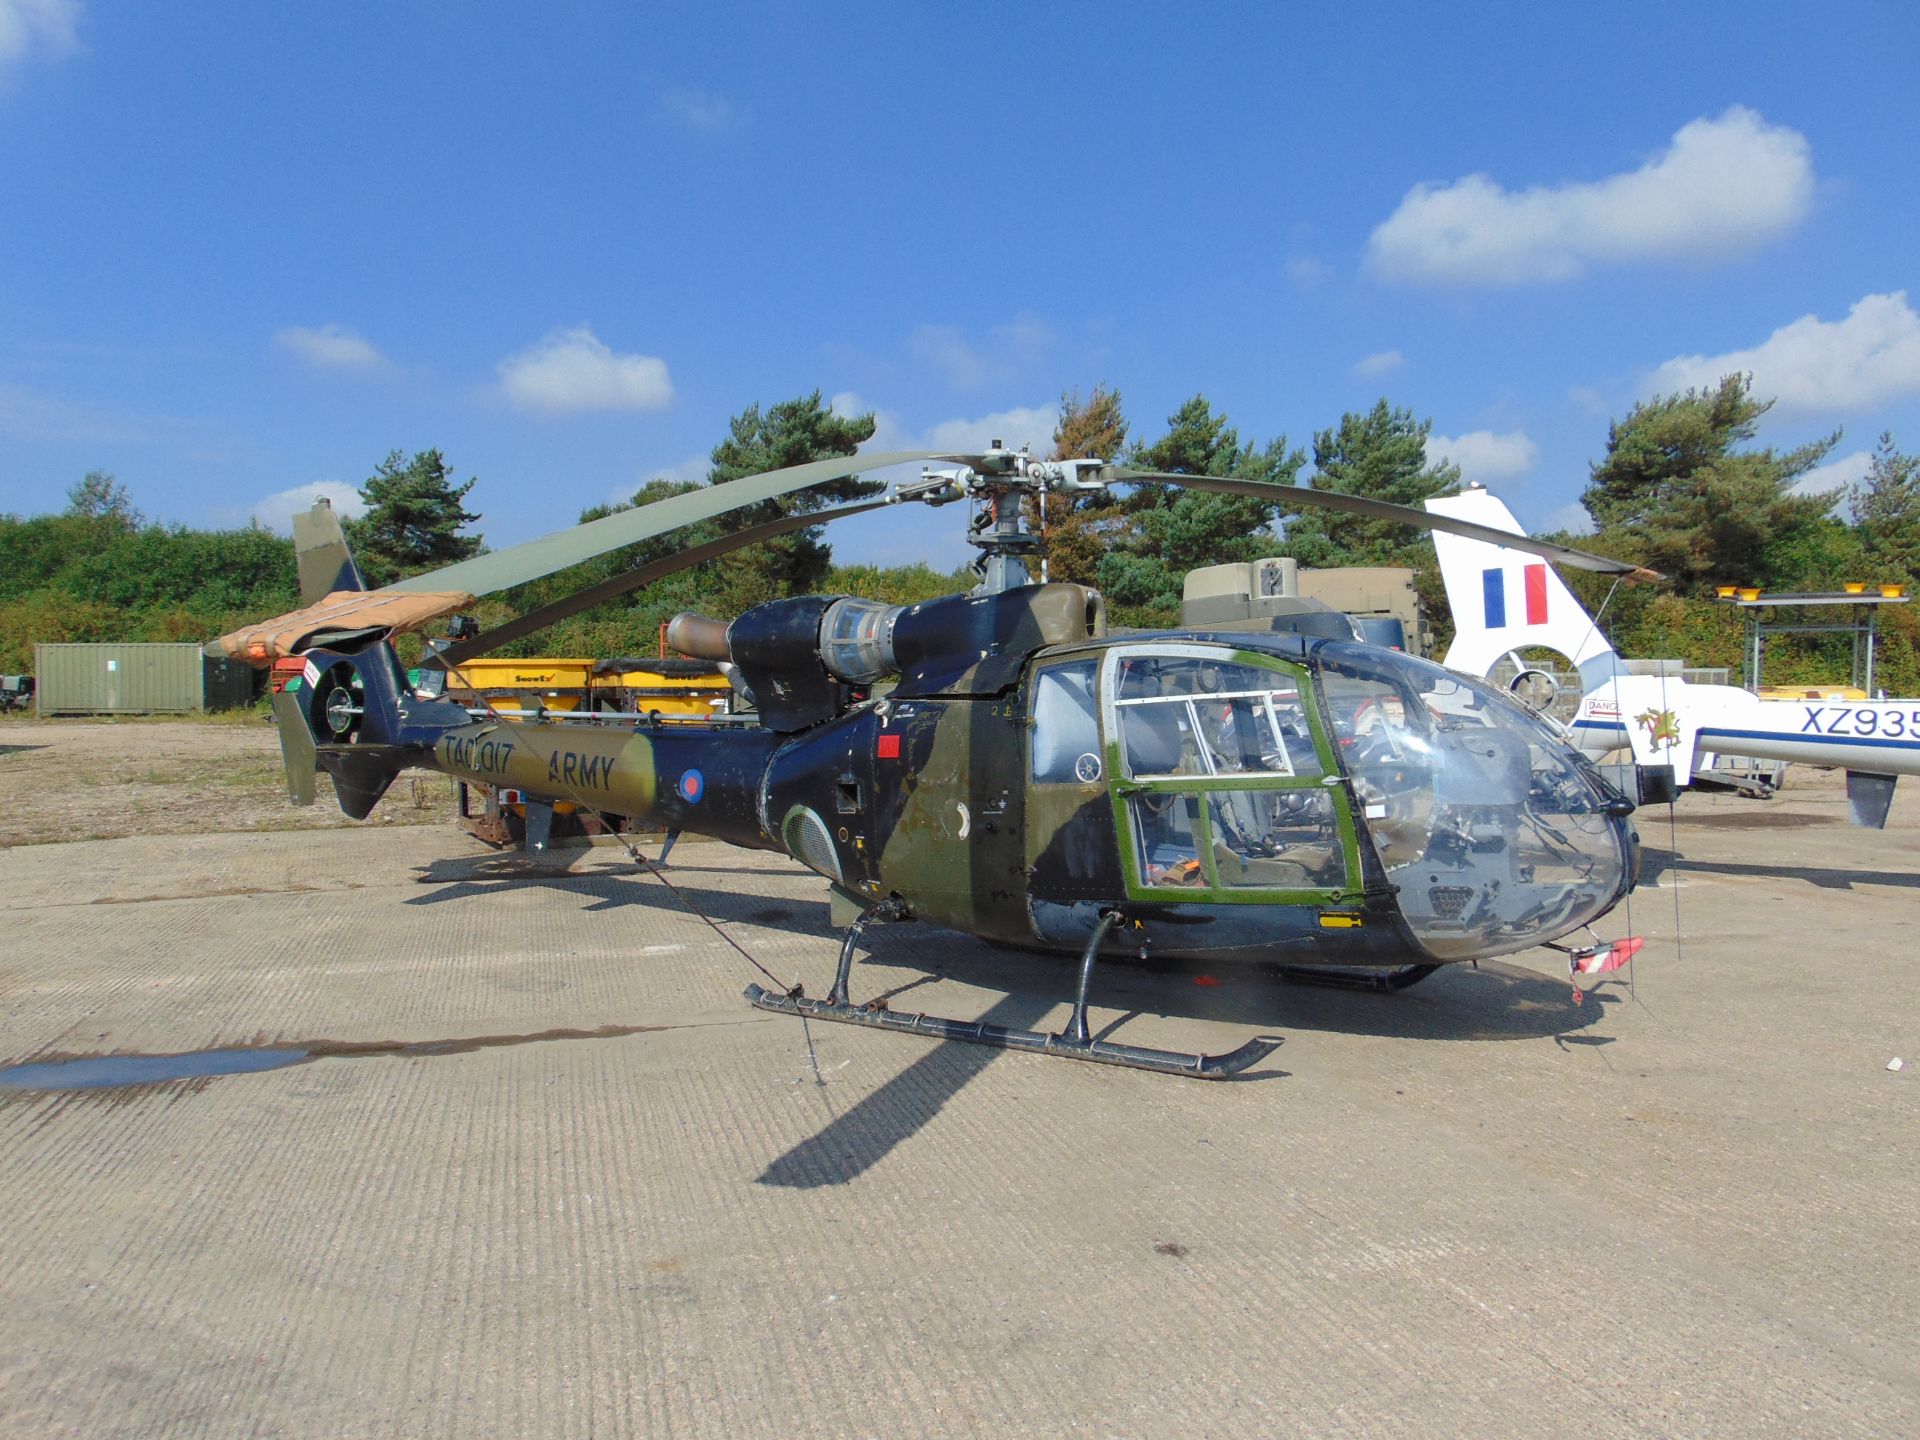 GAZELLE AH1 TURBINE HELICOPTER FROM UK MINISTRY OF DEFENCE